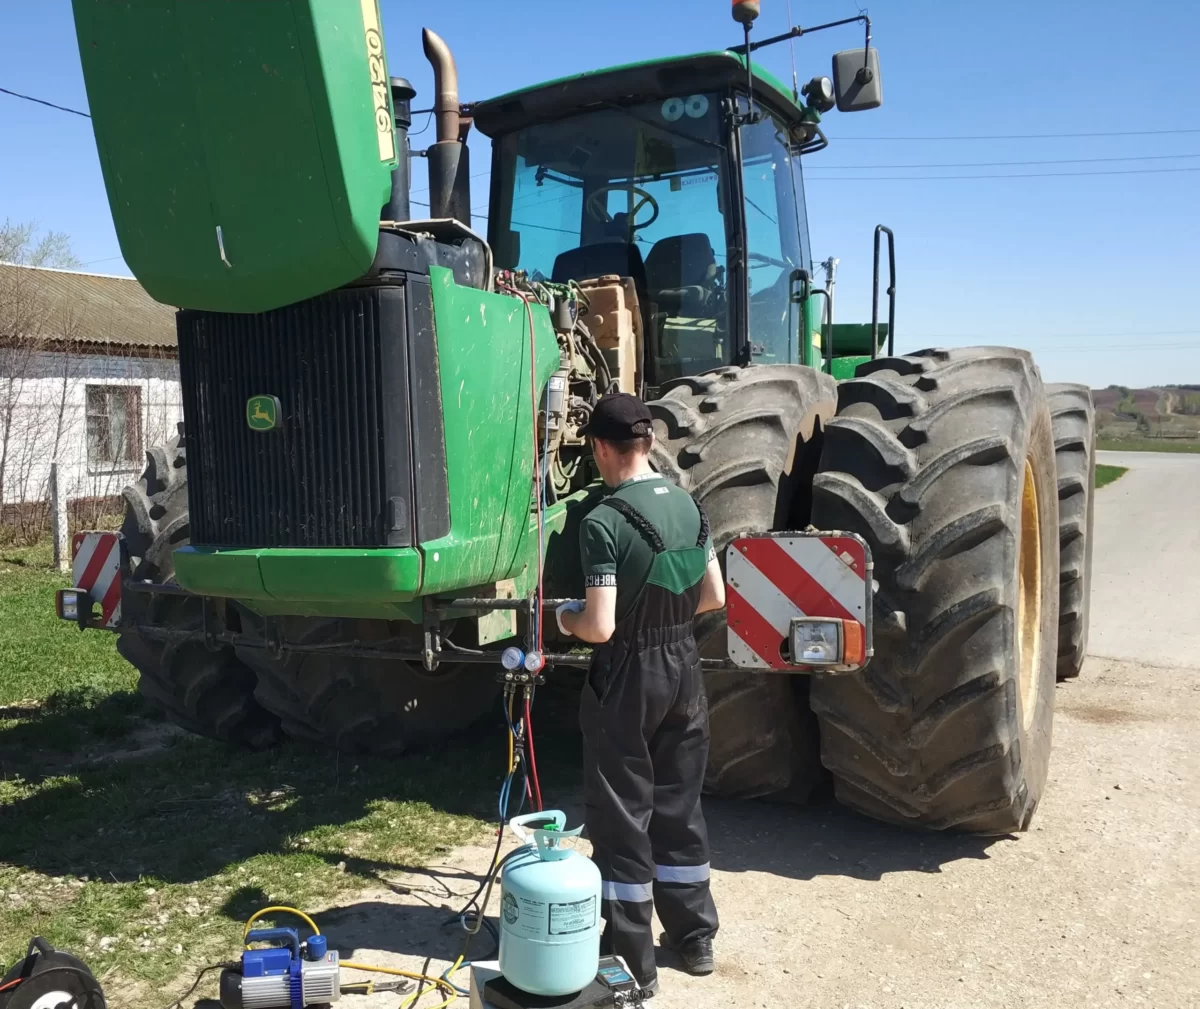 Refilling the John Deree tractor air conditioner